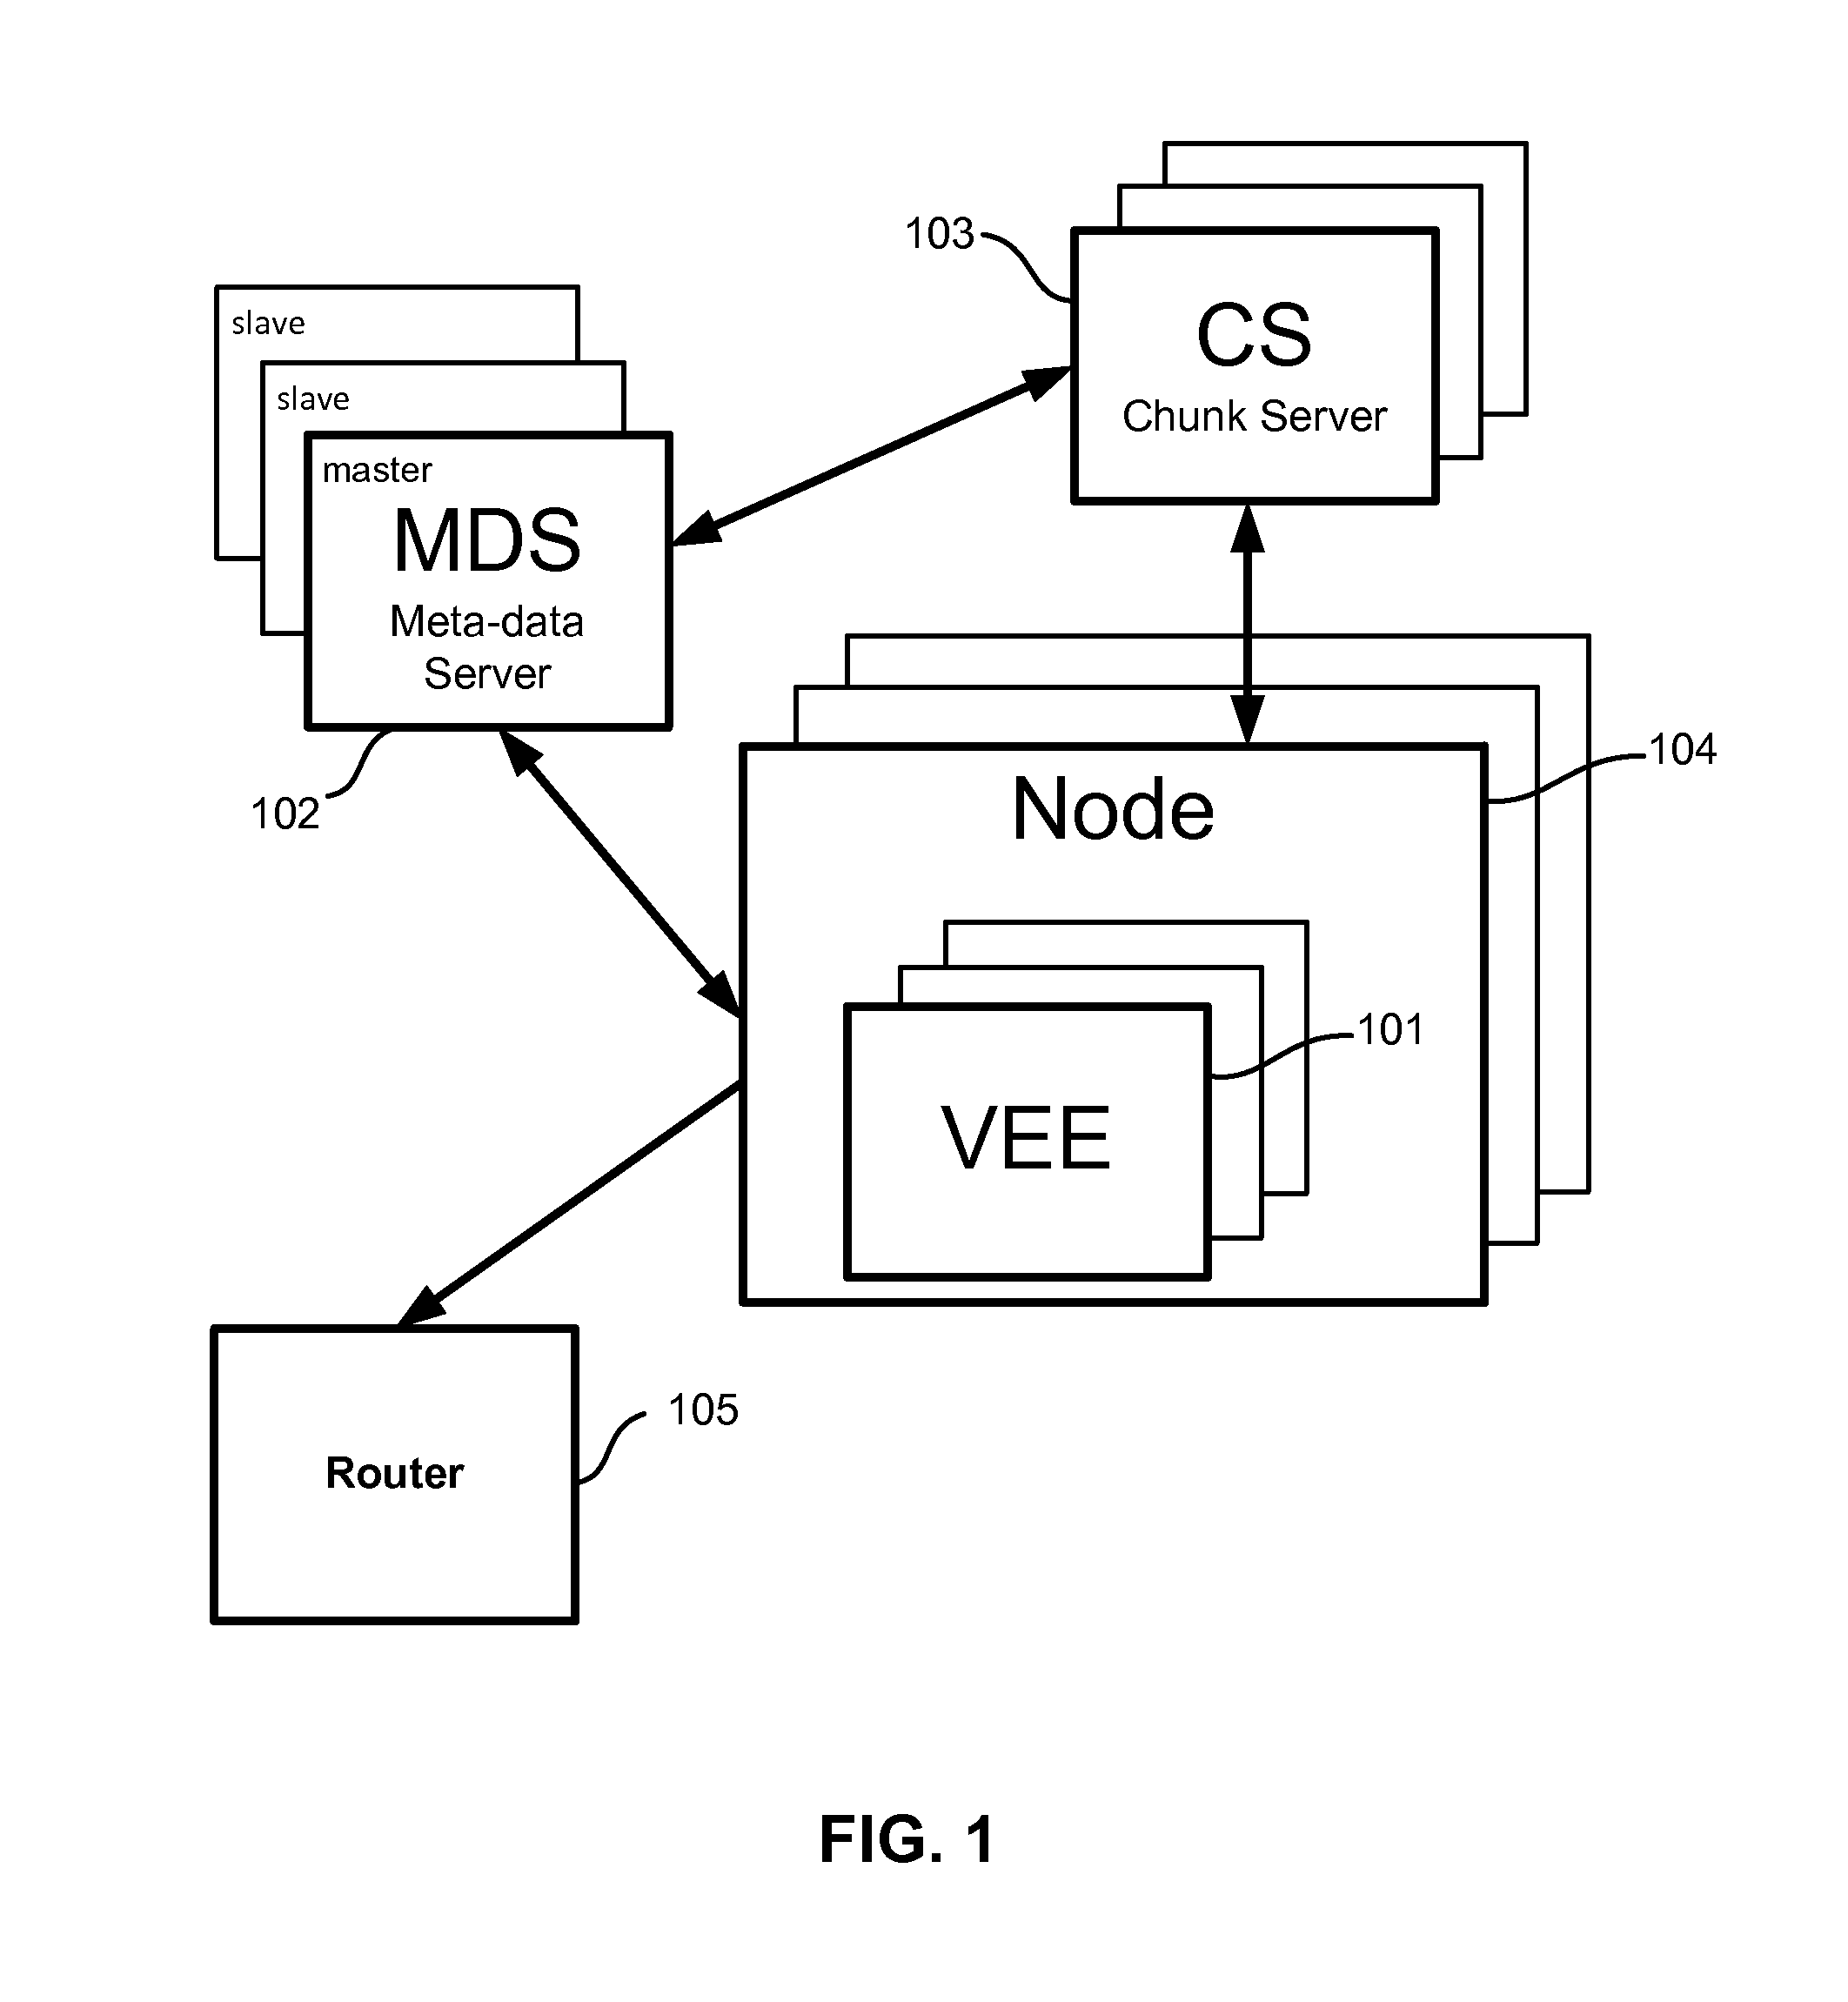 Method for high availability of services in cloud computing systems